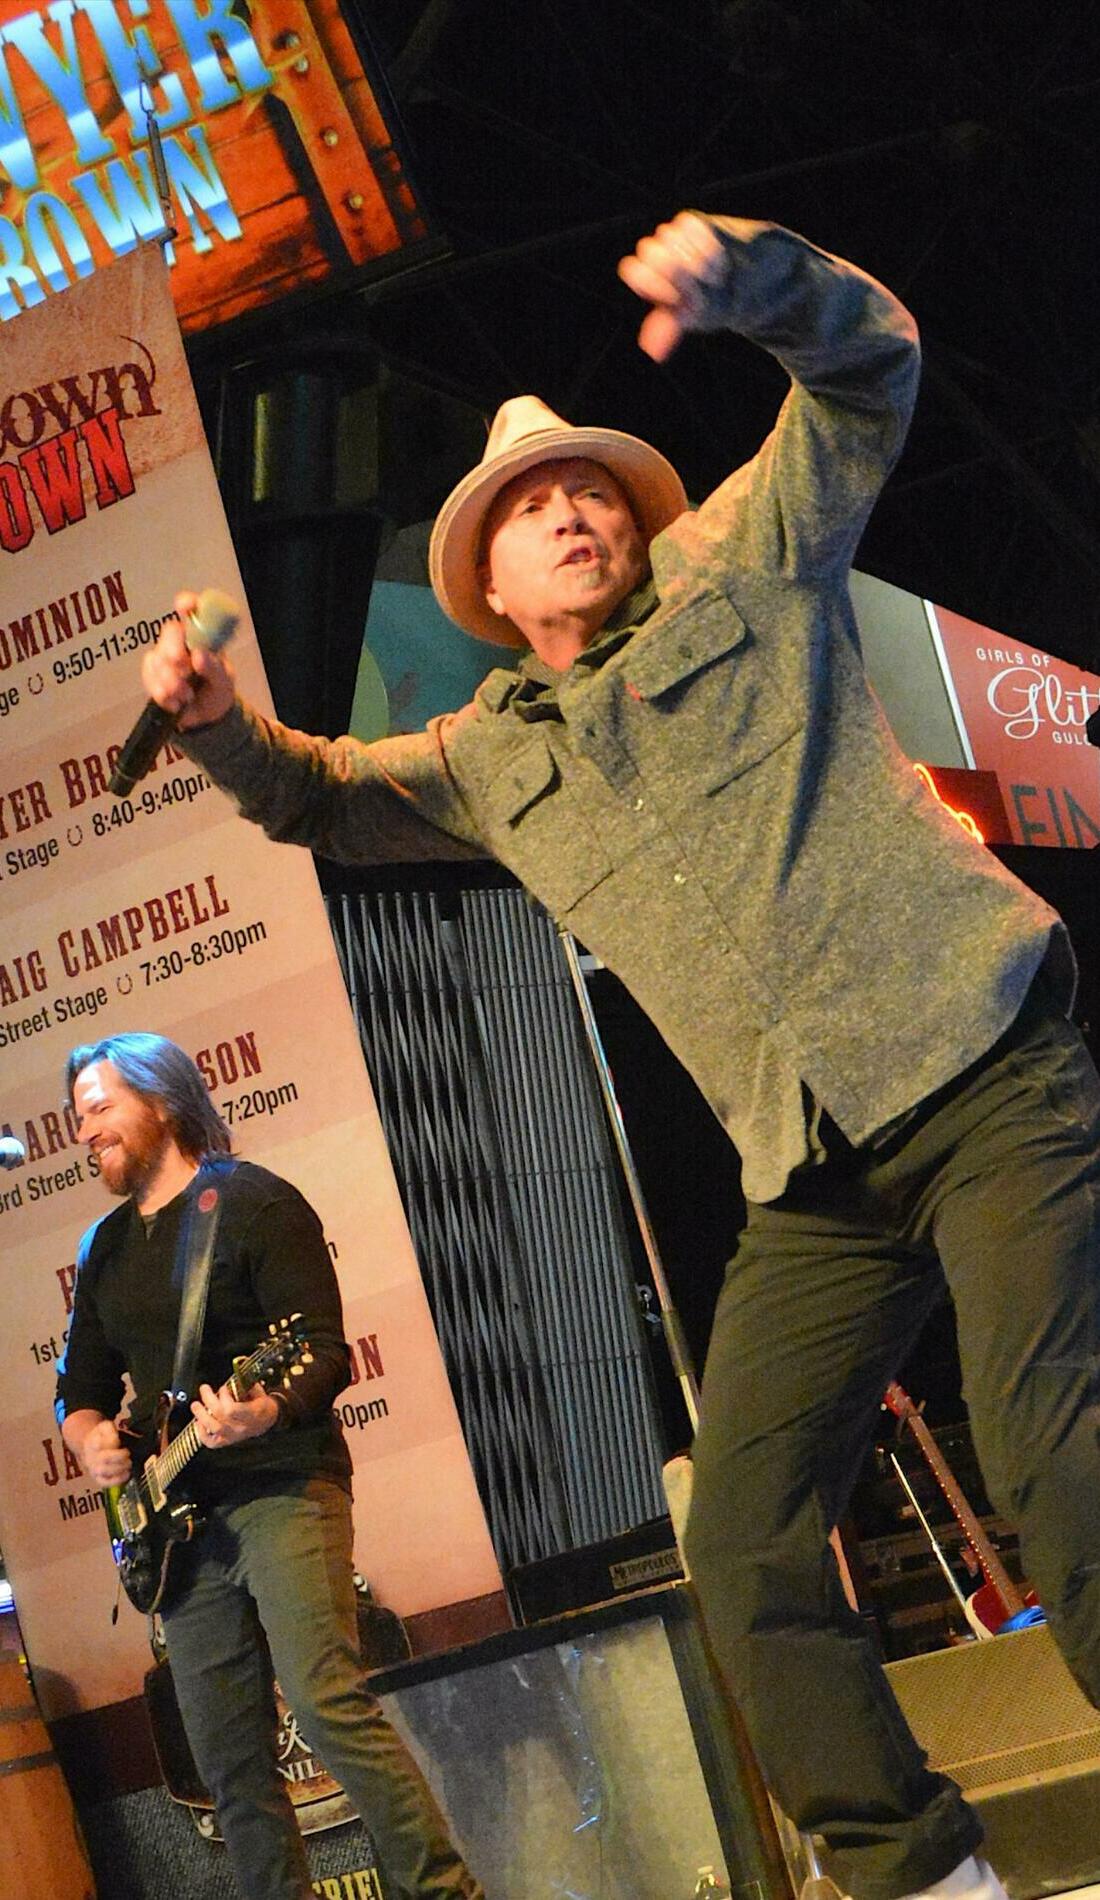 Sawyer Brown Central City, June 6/27/2021 at Linn County Fairgrounds